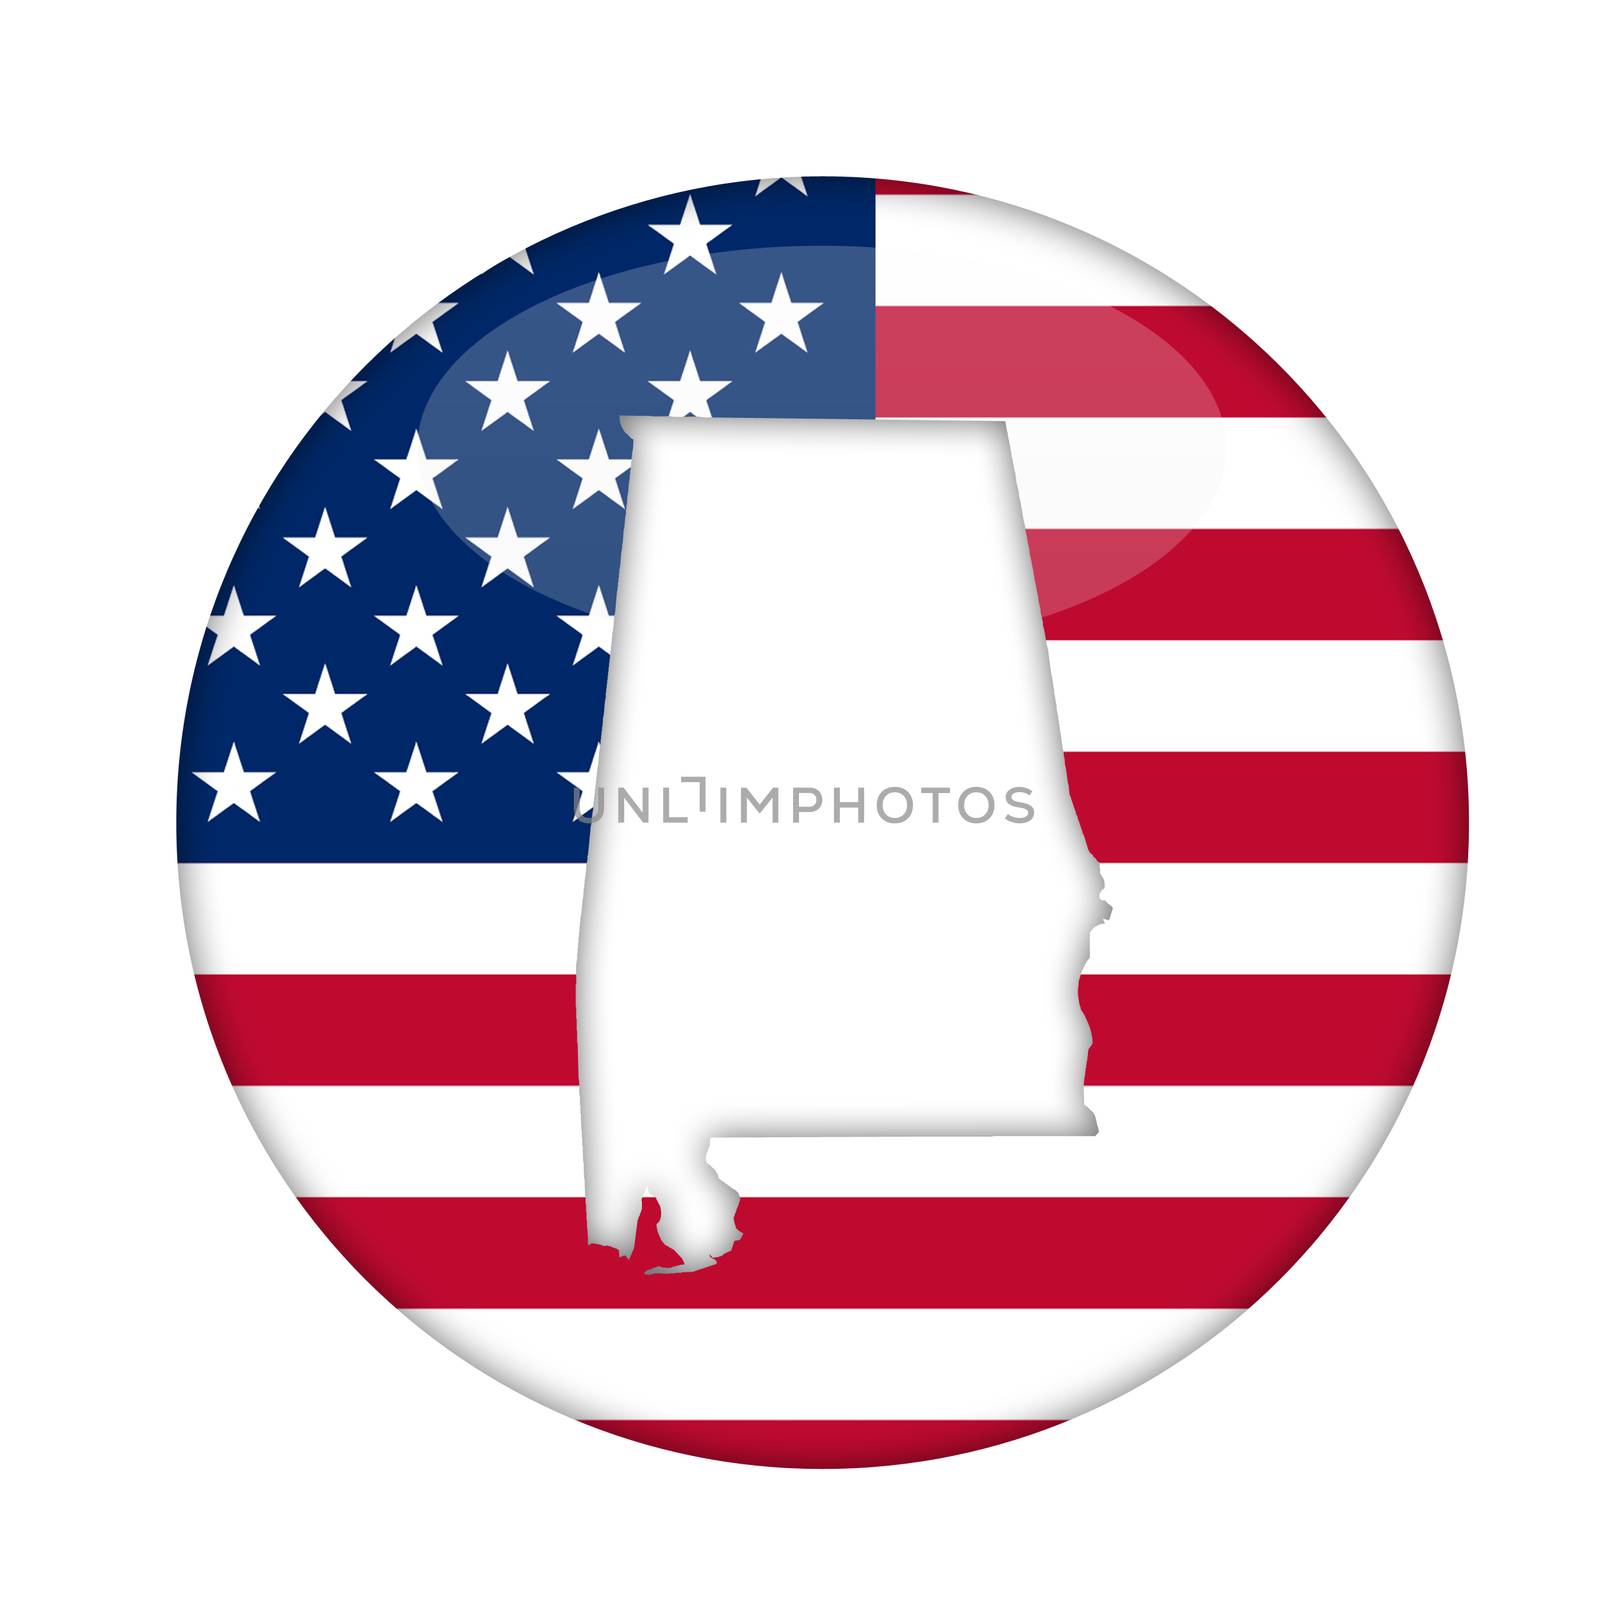 Alabama state of America badge isolated on a white background.